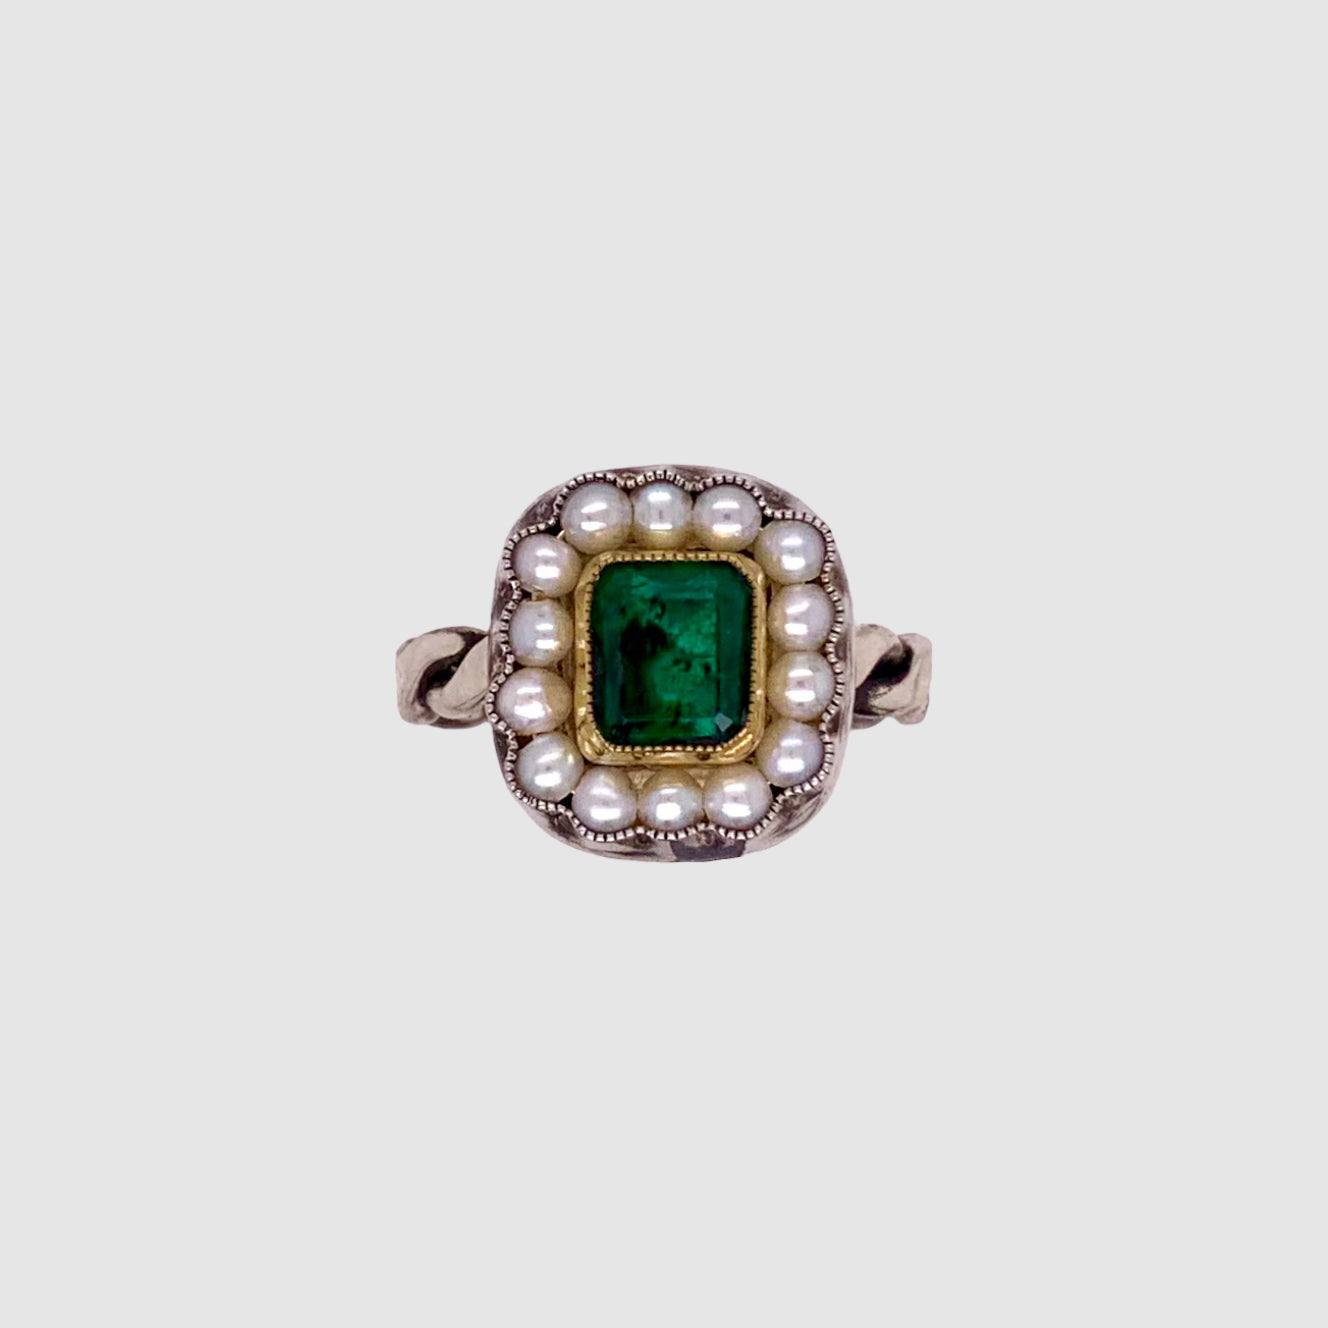 HEIRLOOM RING //  SEED PEARLS // SQUARE EMERALD